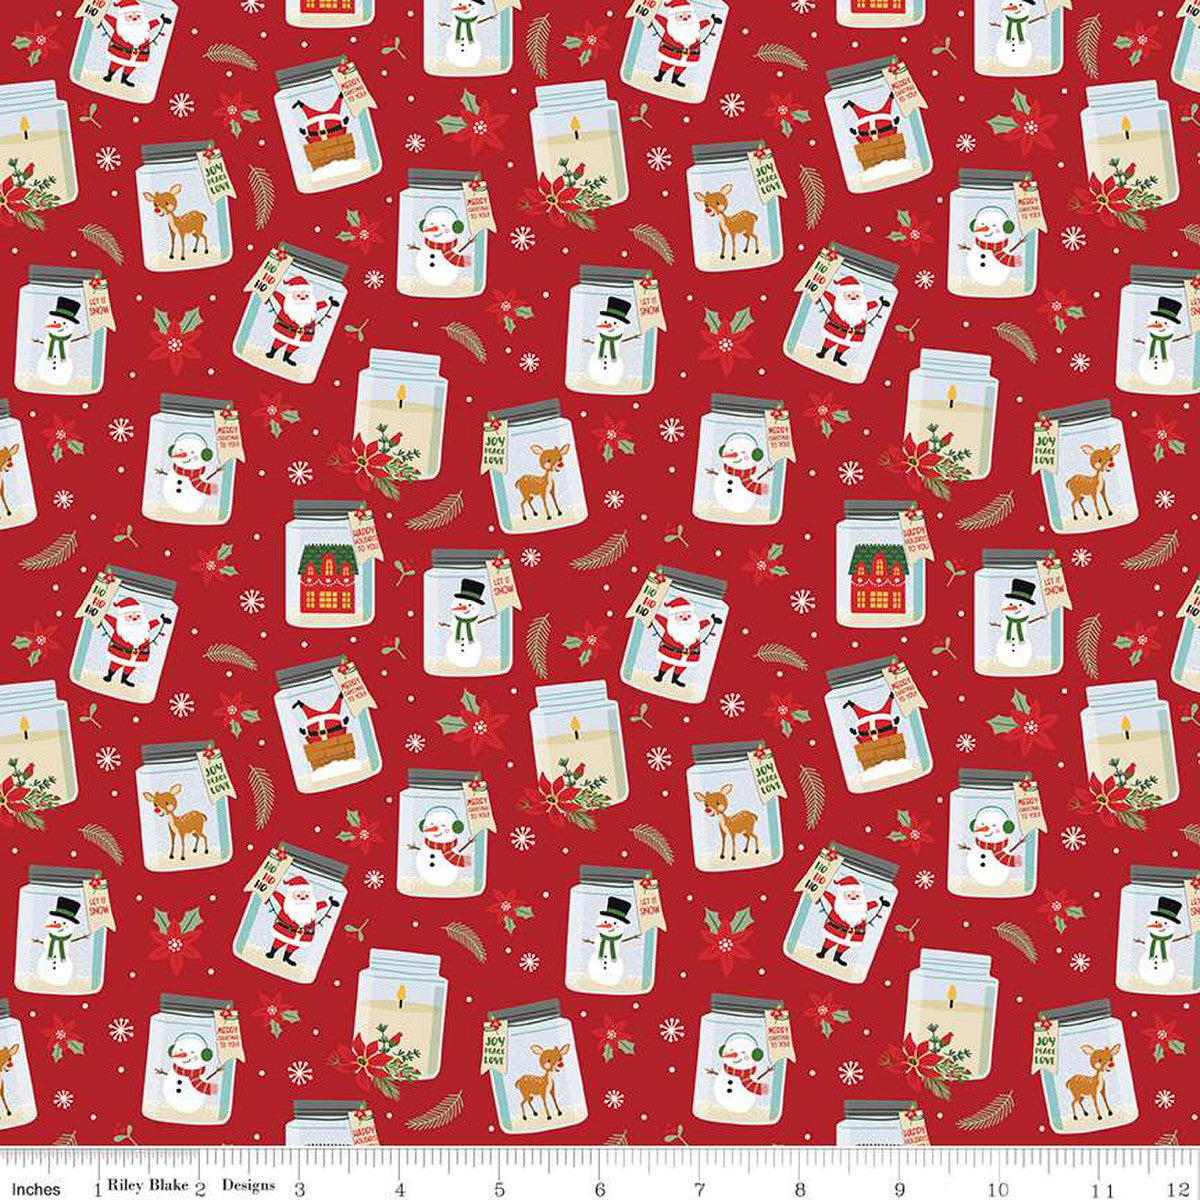 This print features jars with Christmas-themed icons on a background with dots, leaves, poinsettias, and snowflakes.